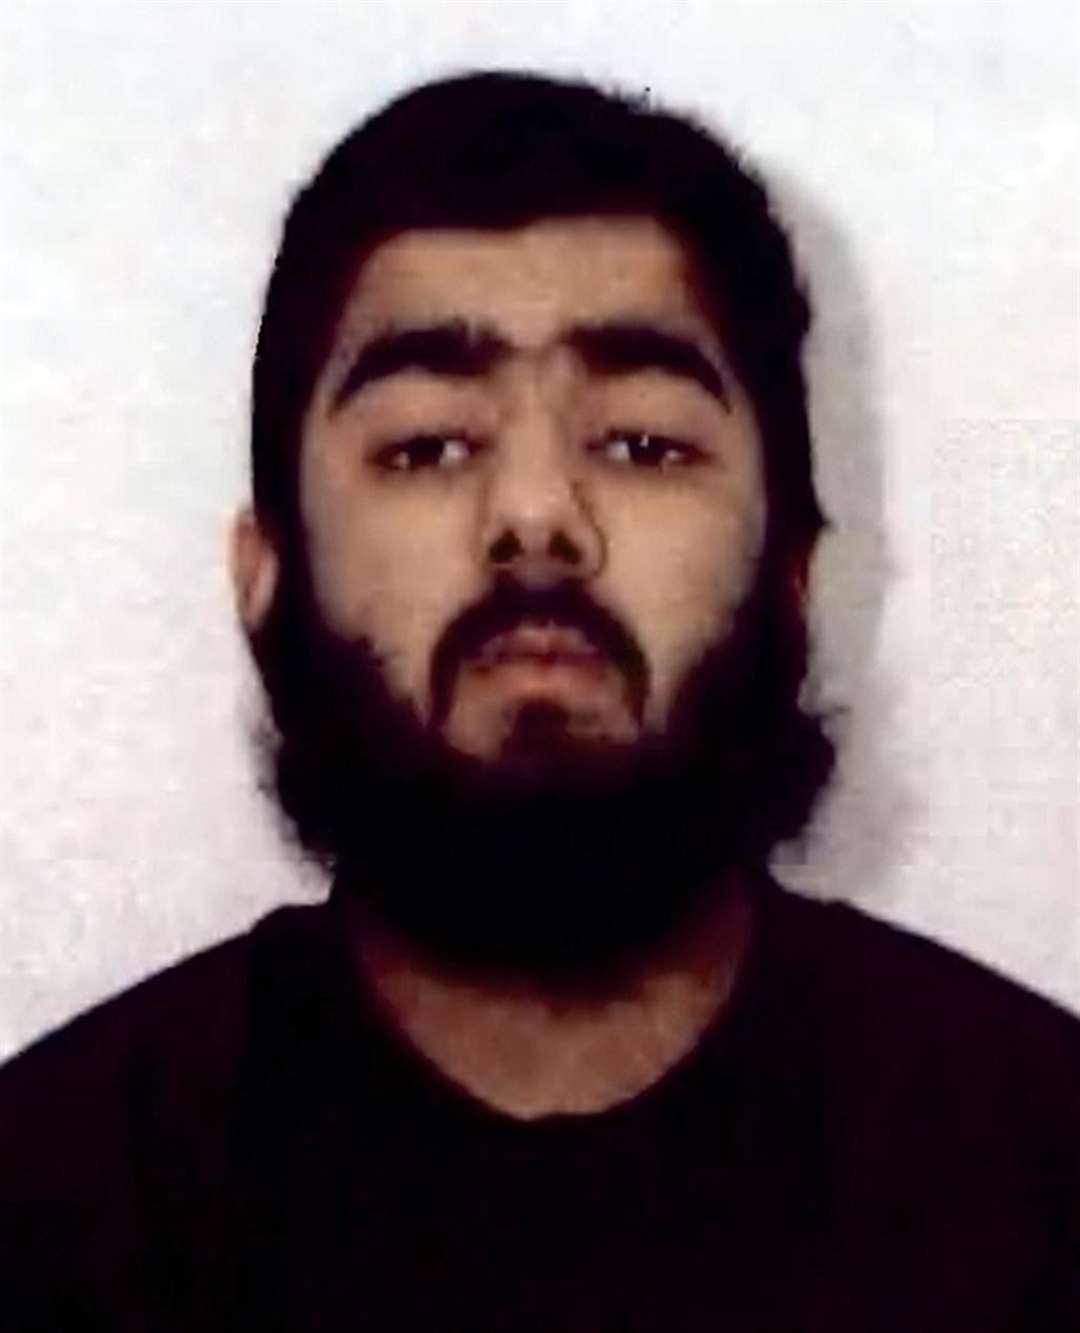 Usman Khan killed two people in his attack last November (West Midlands Police/PA)